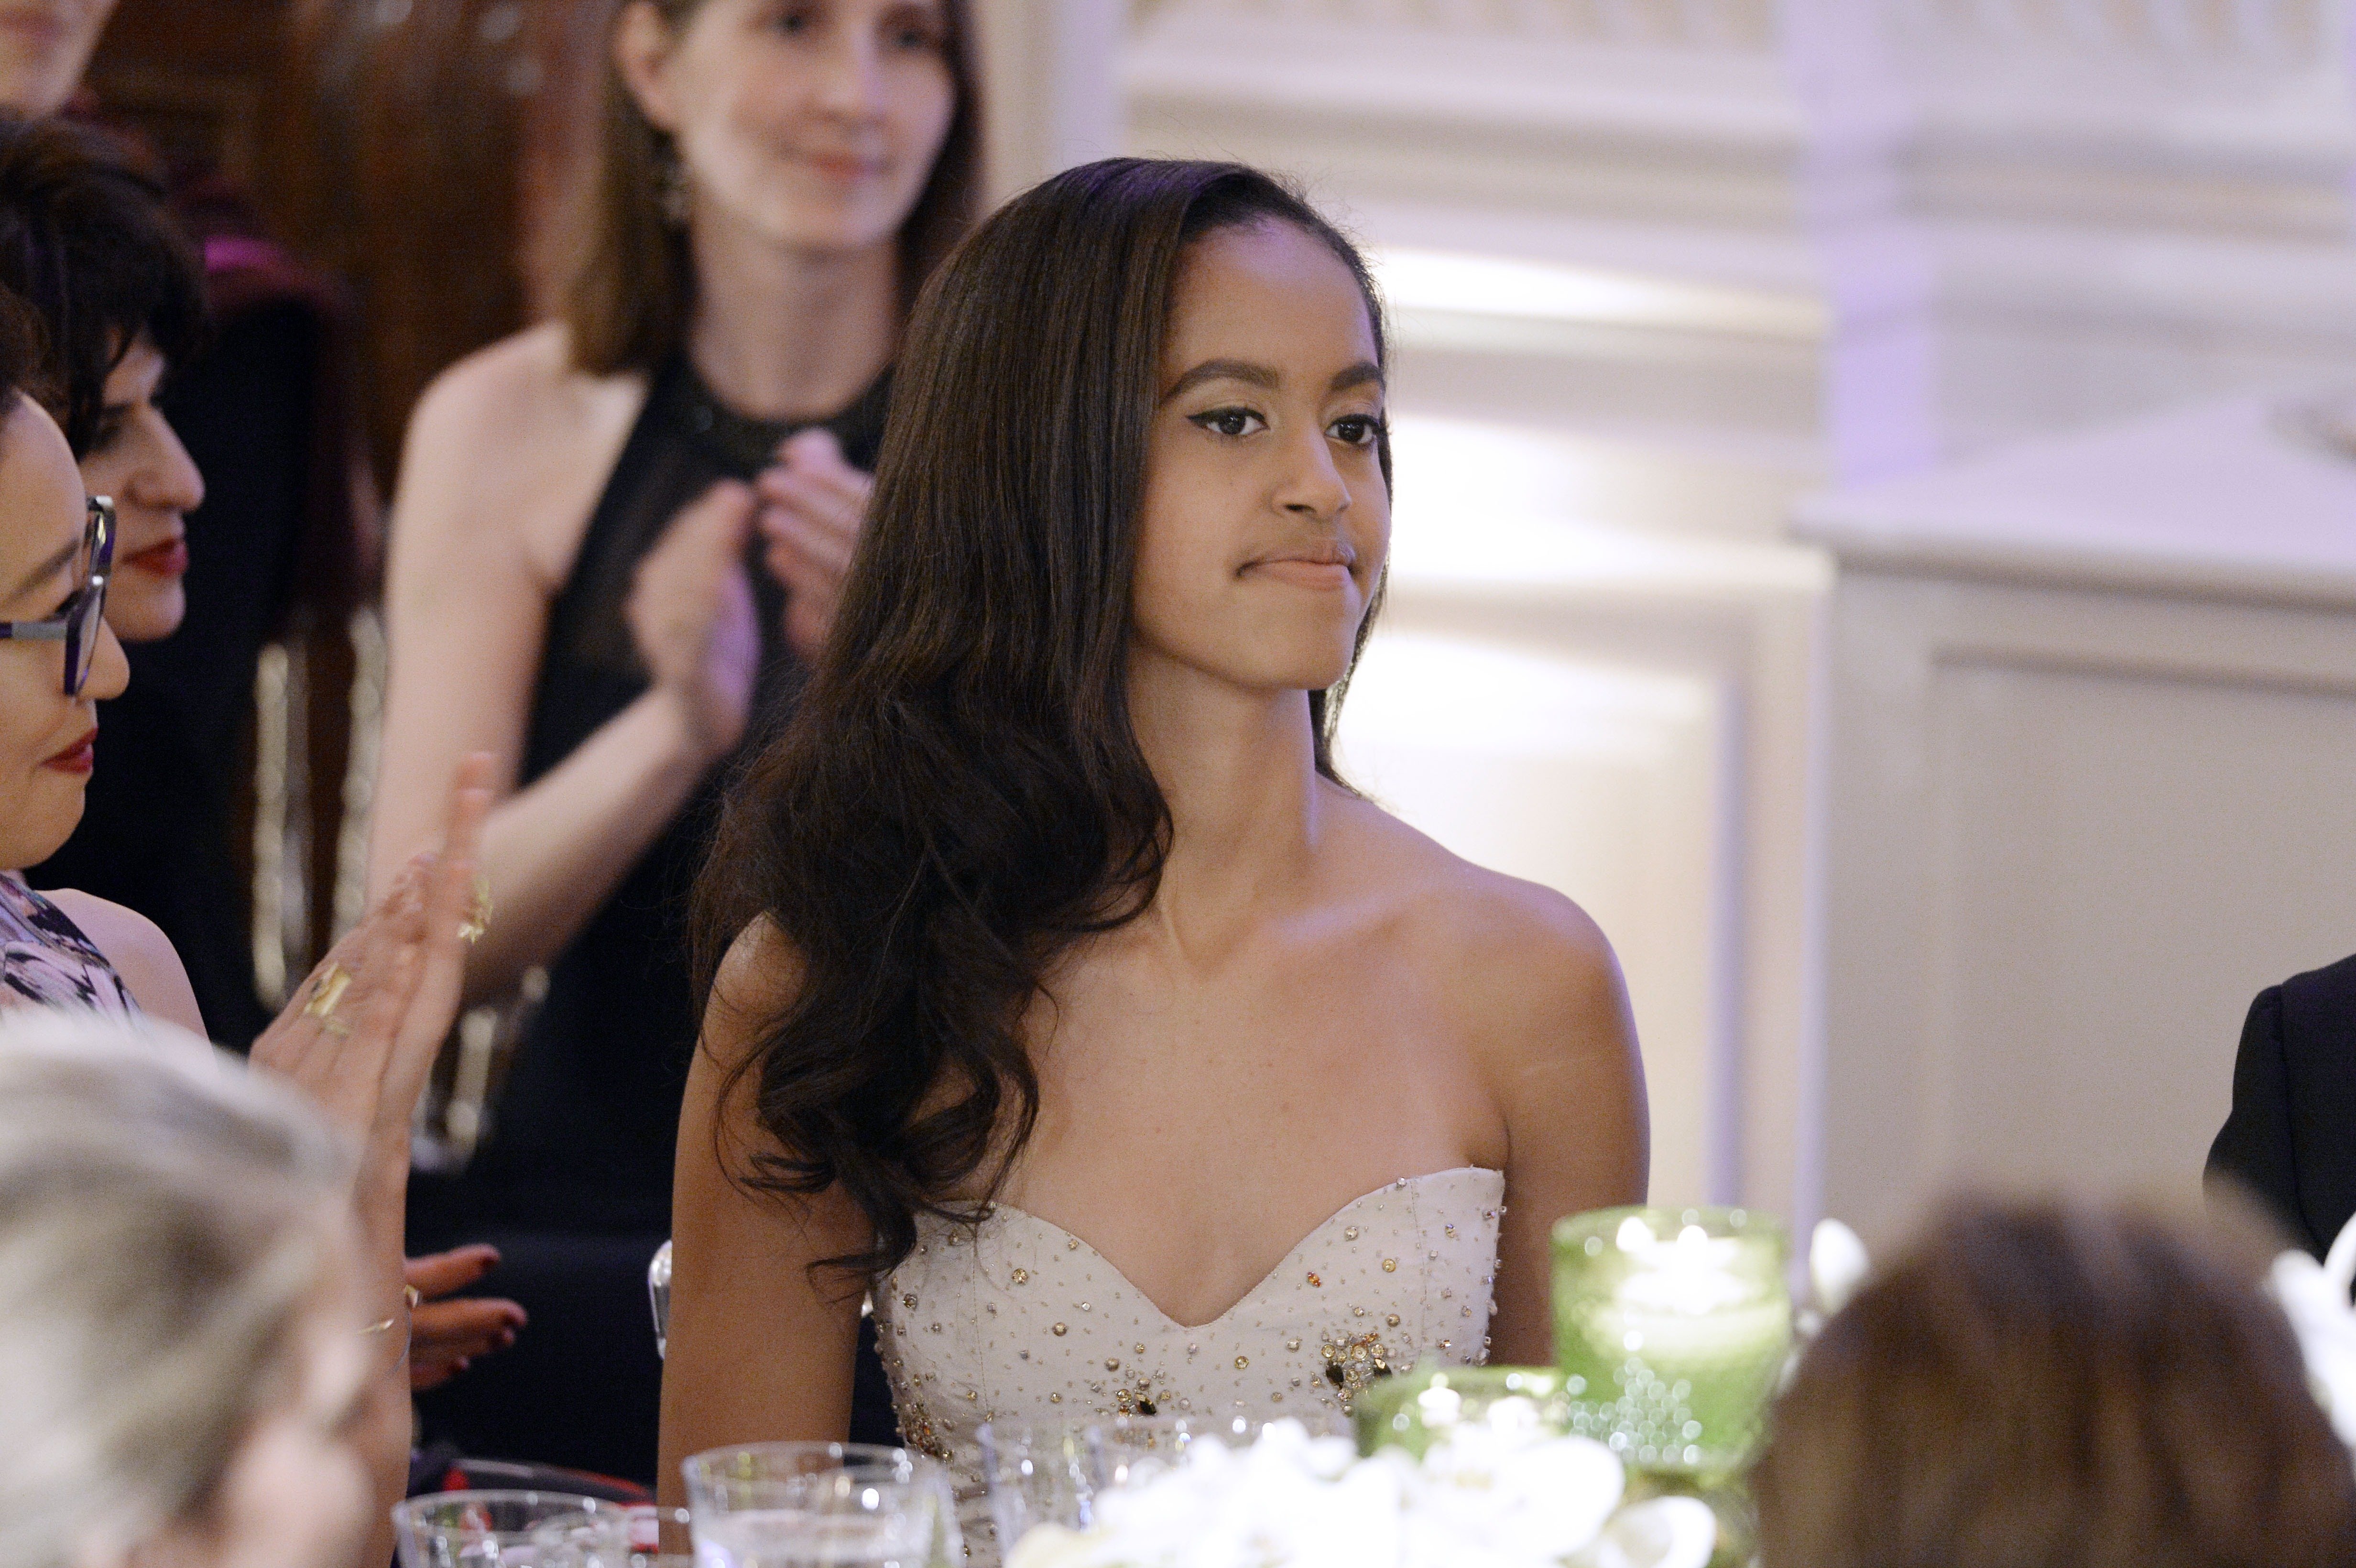 Malia Obama attends a State Dinner at the White House March, 2016 | Photo: Getty Images